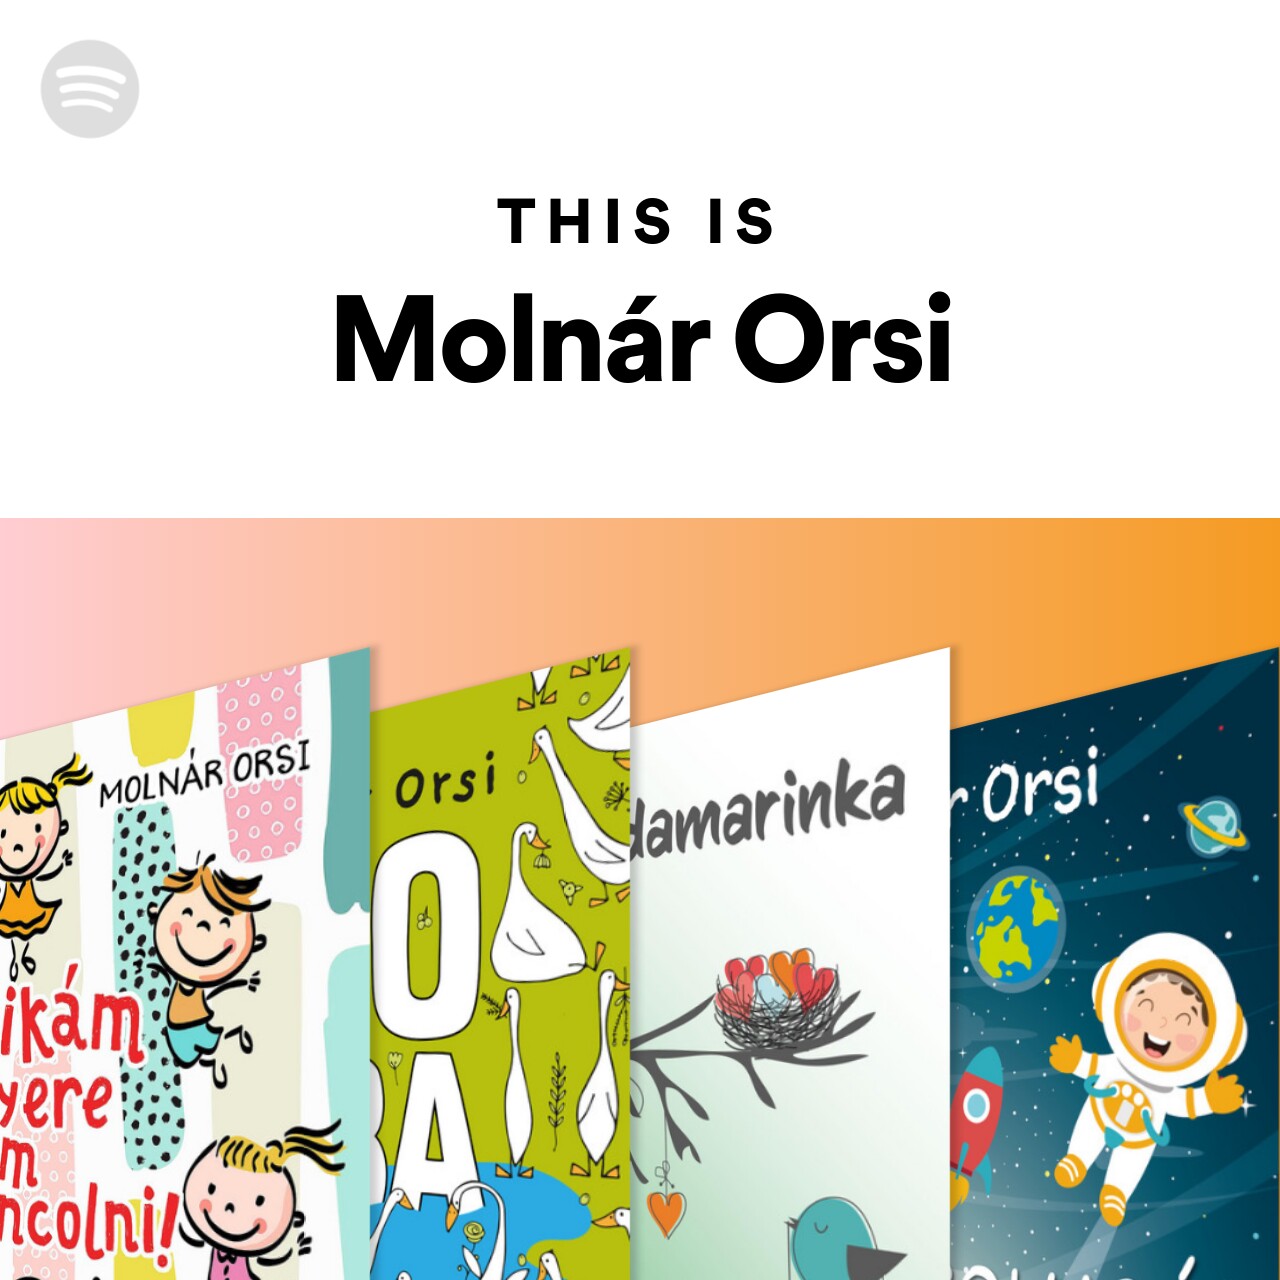 This Is Molnár Orsi